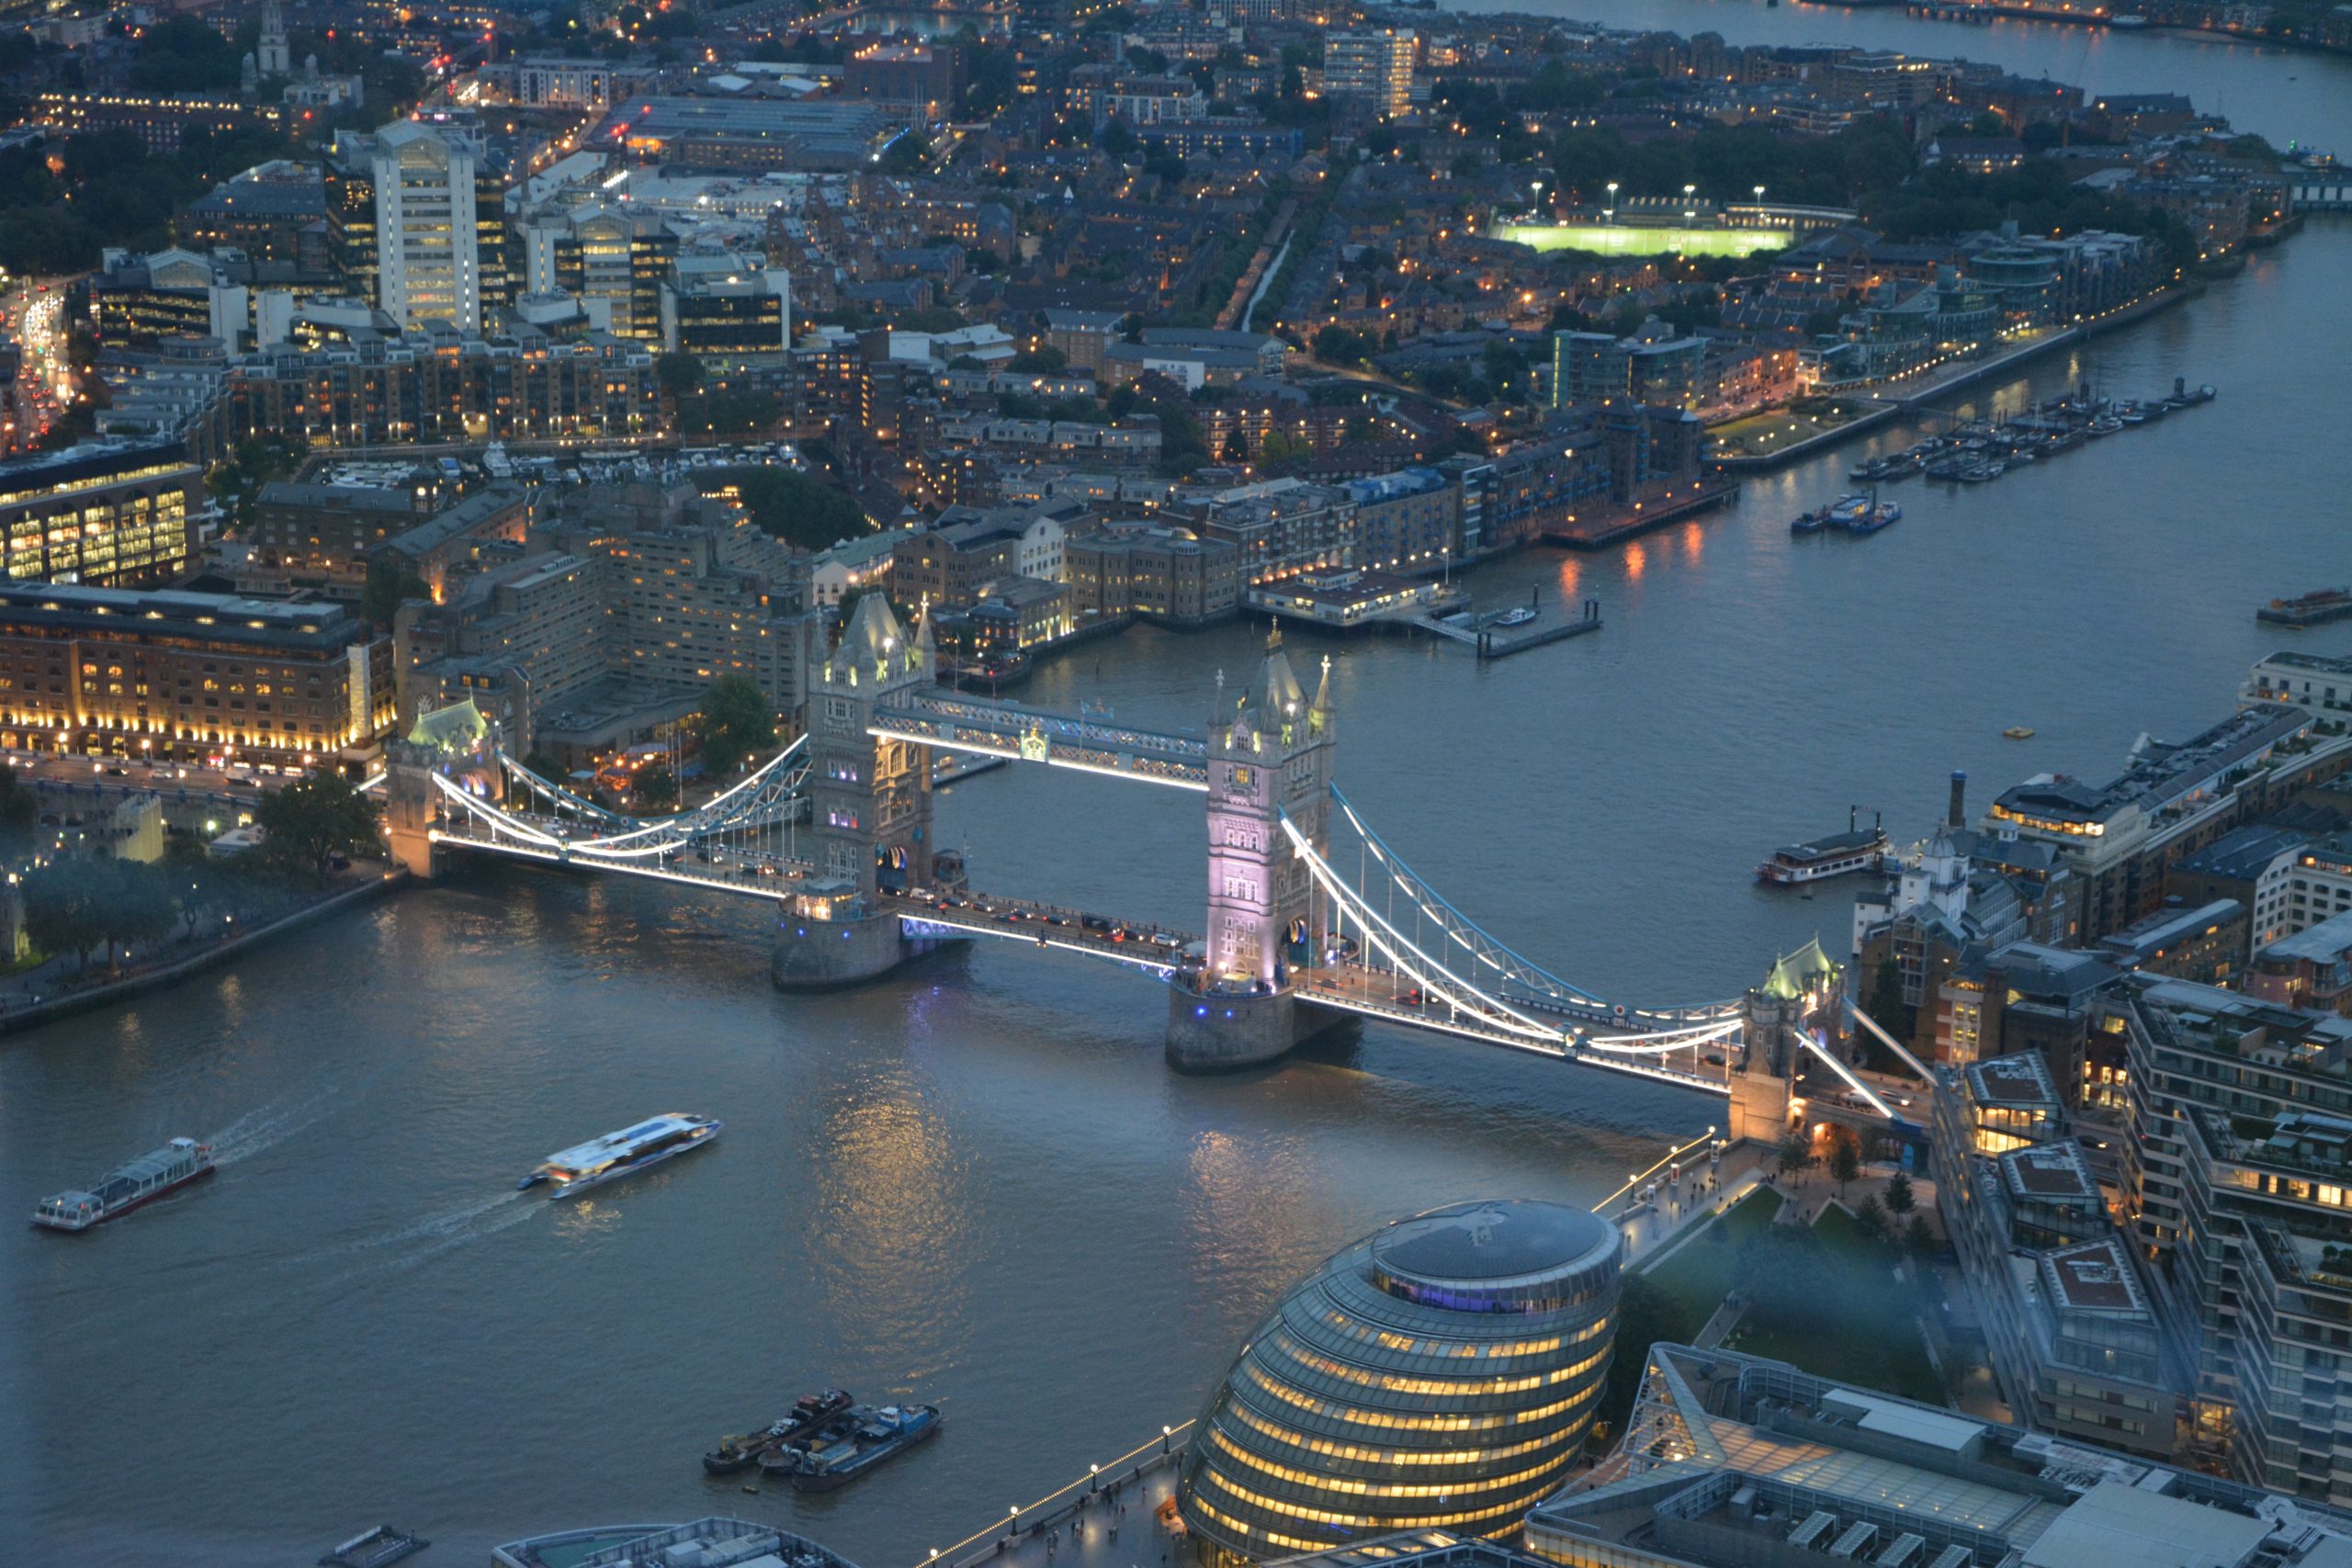 Aerial photo of London Tower Bridge in the early evening.